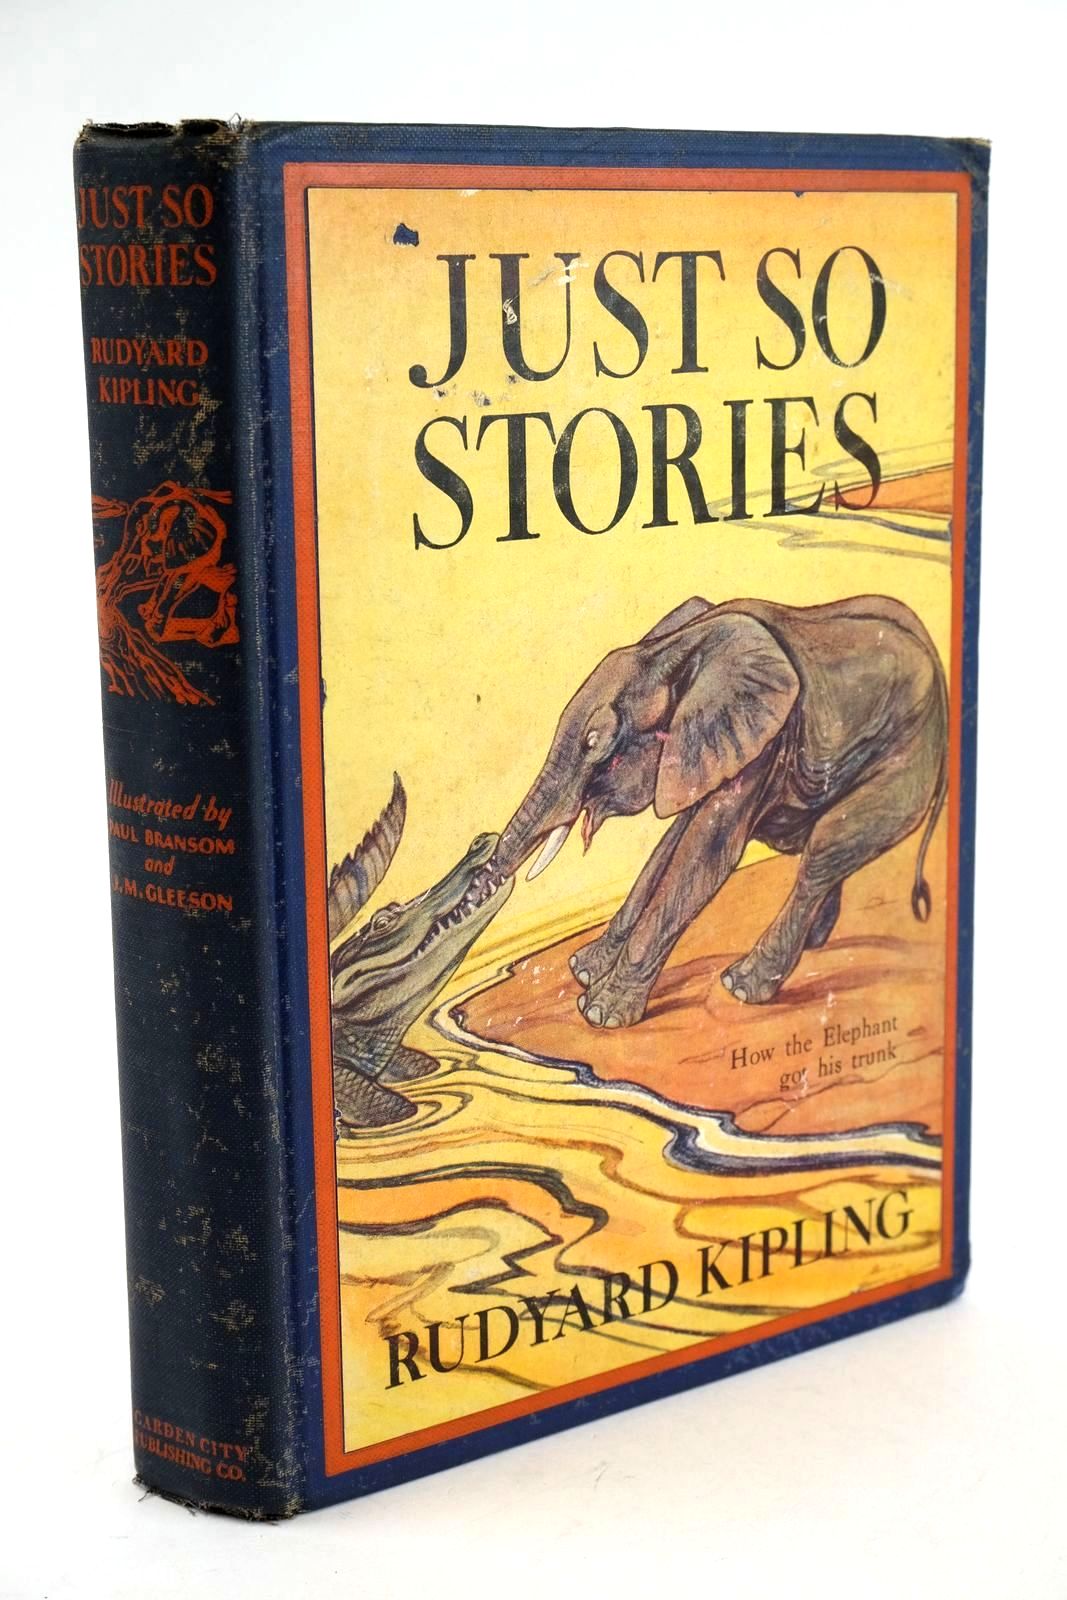 Photo of JUST SO STORIES written by Kipling, Rudyard illustrated by Gleeson, Joseph M. Bransom, Paul published by Garden City Publishing Co. (STOCK CODE: 1324237)  for sale by Stella & Rose's Books